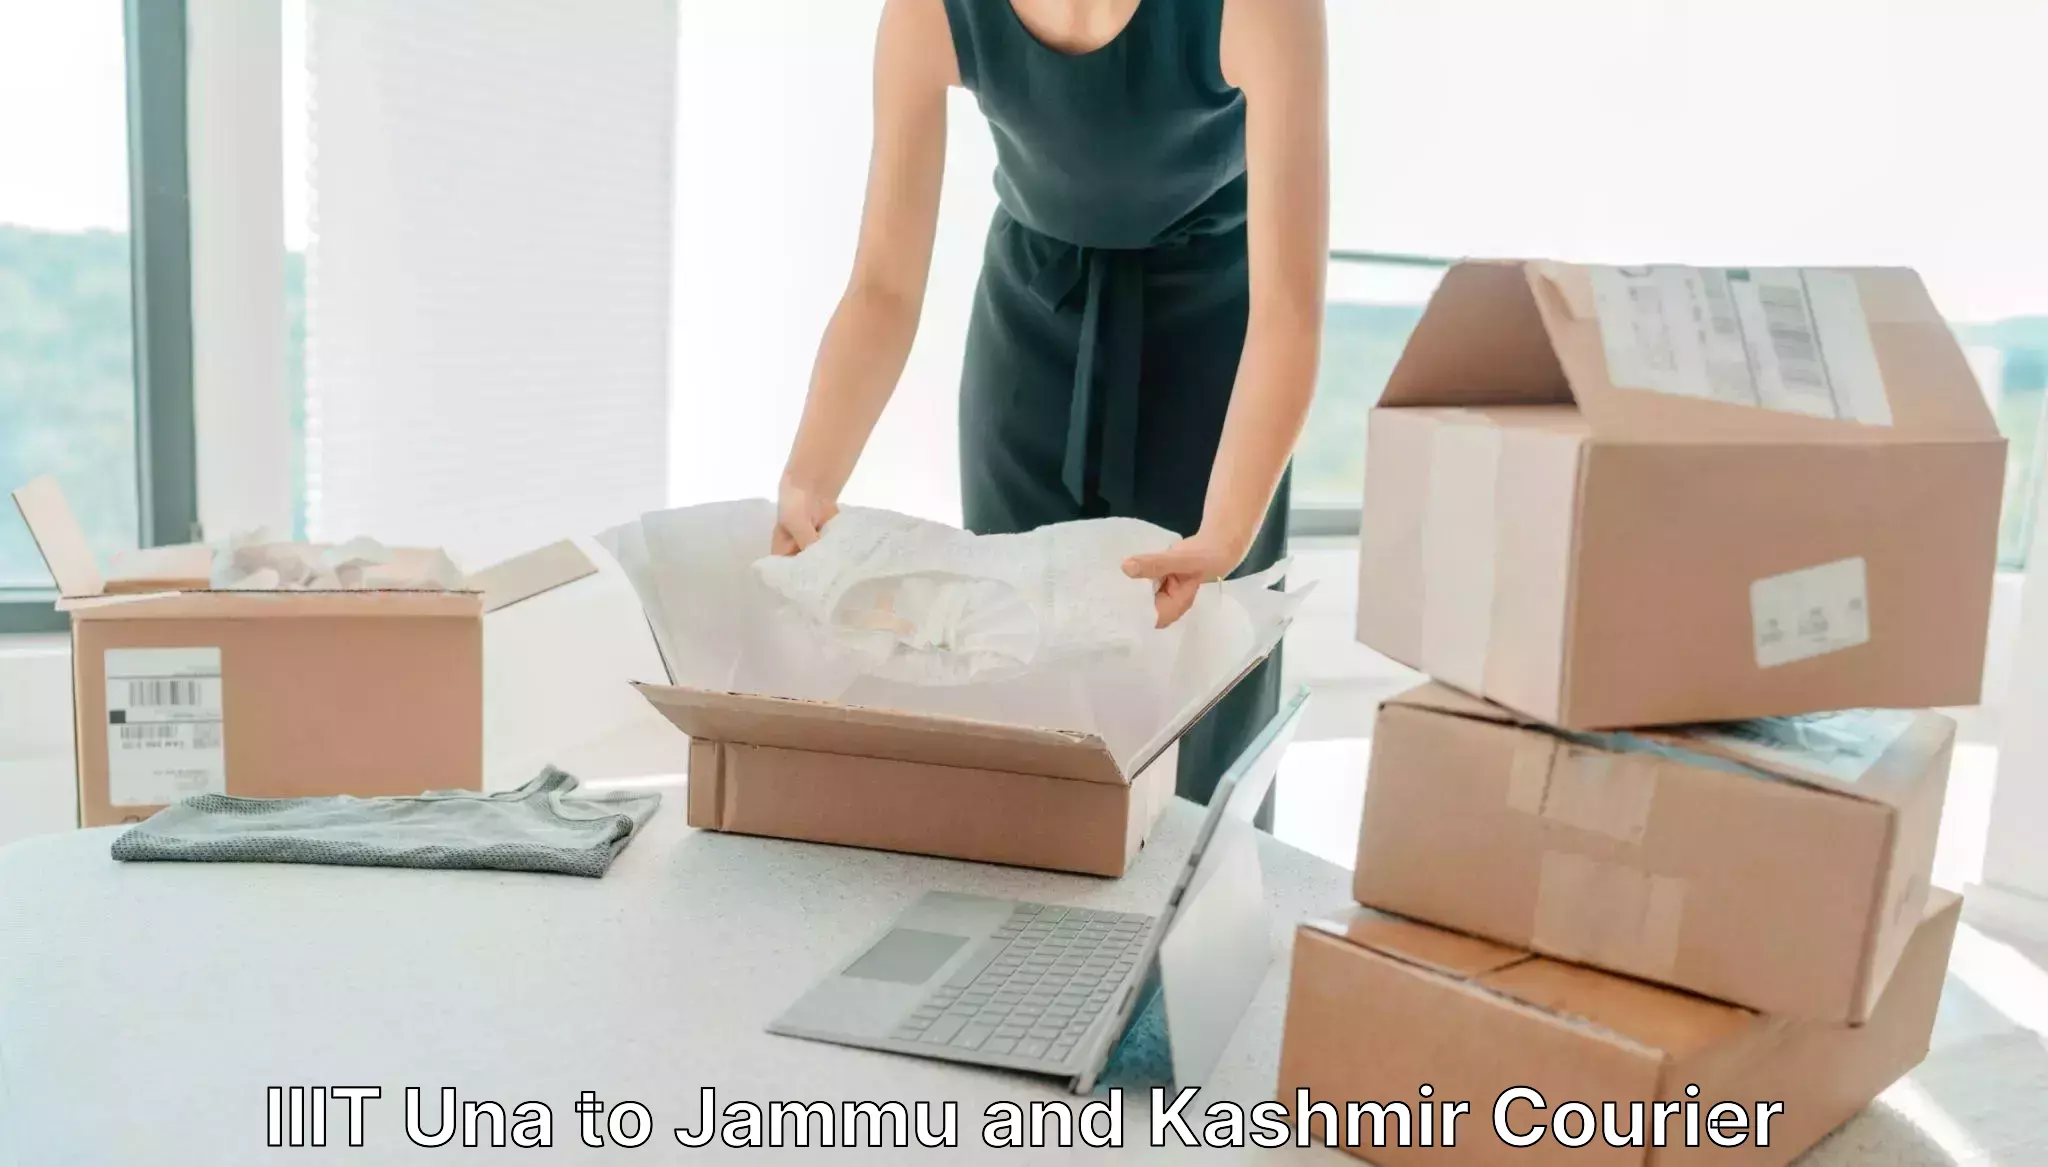 Same-day delivery solutions IIIT Una to Jammu and Kashmir